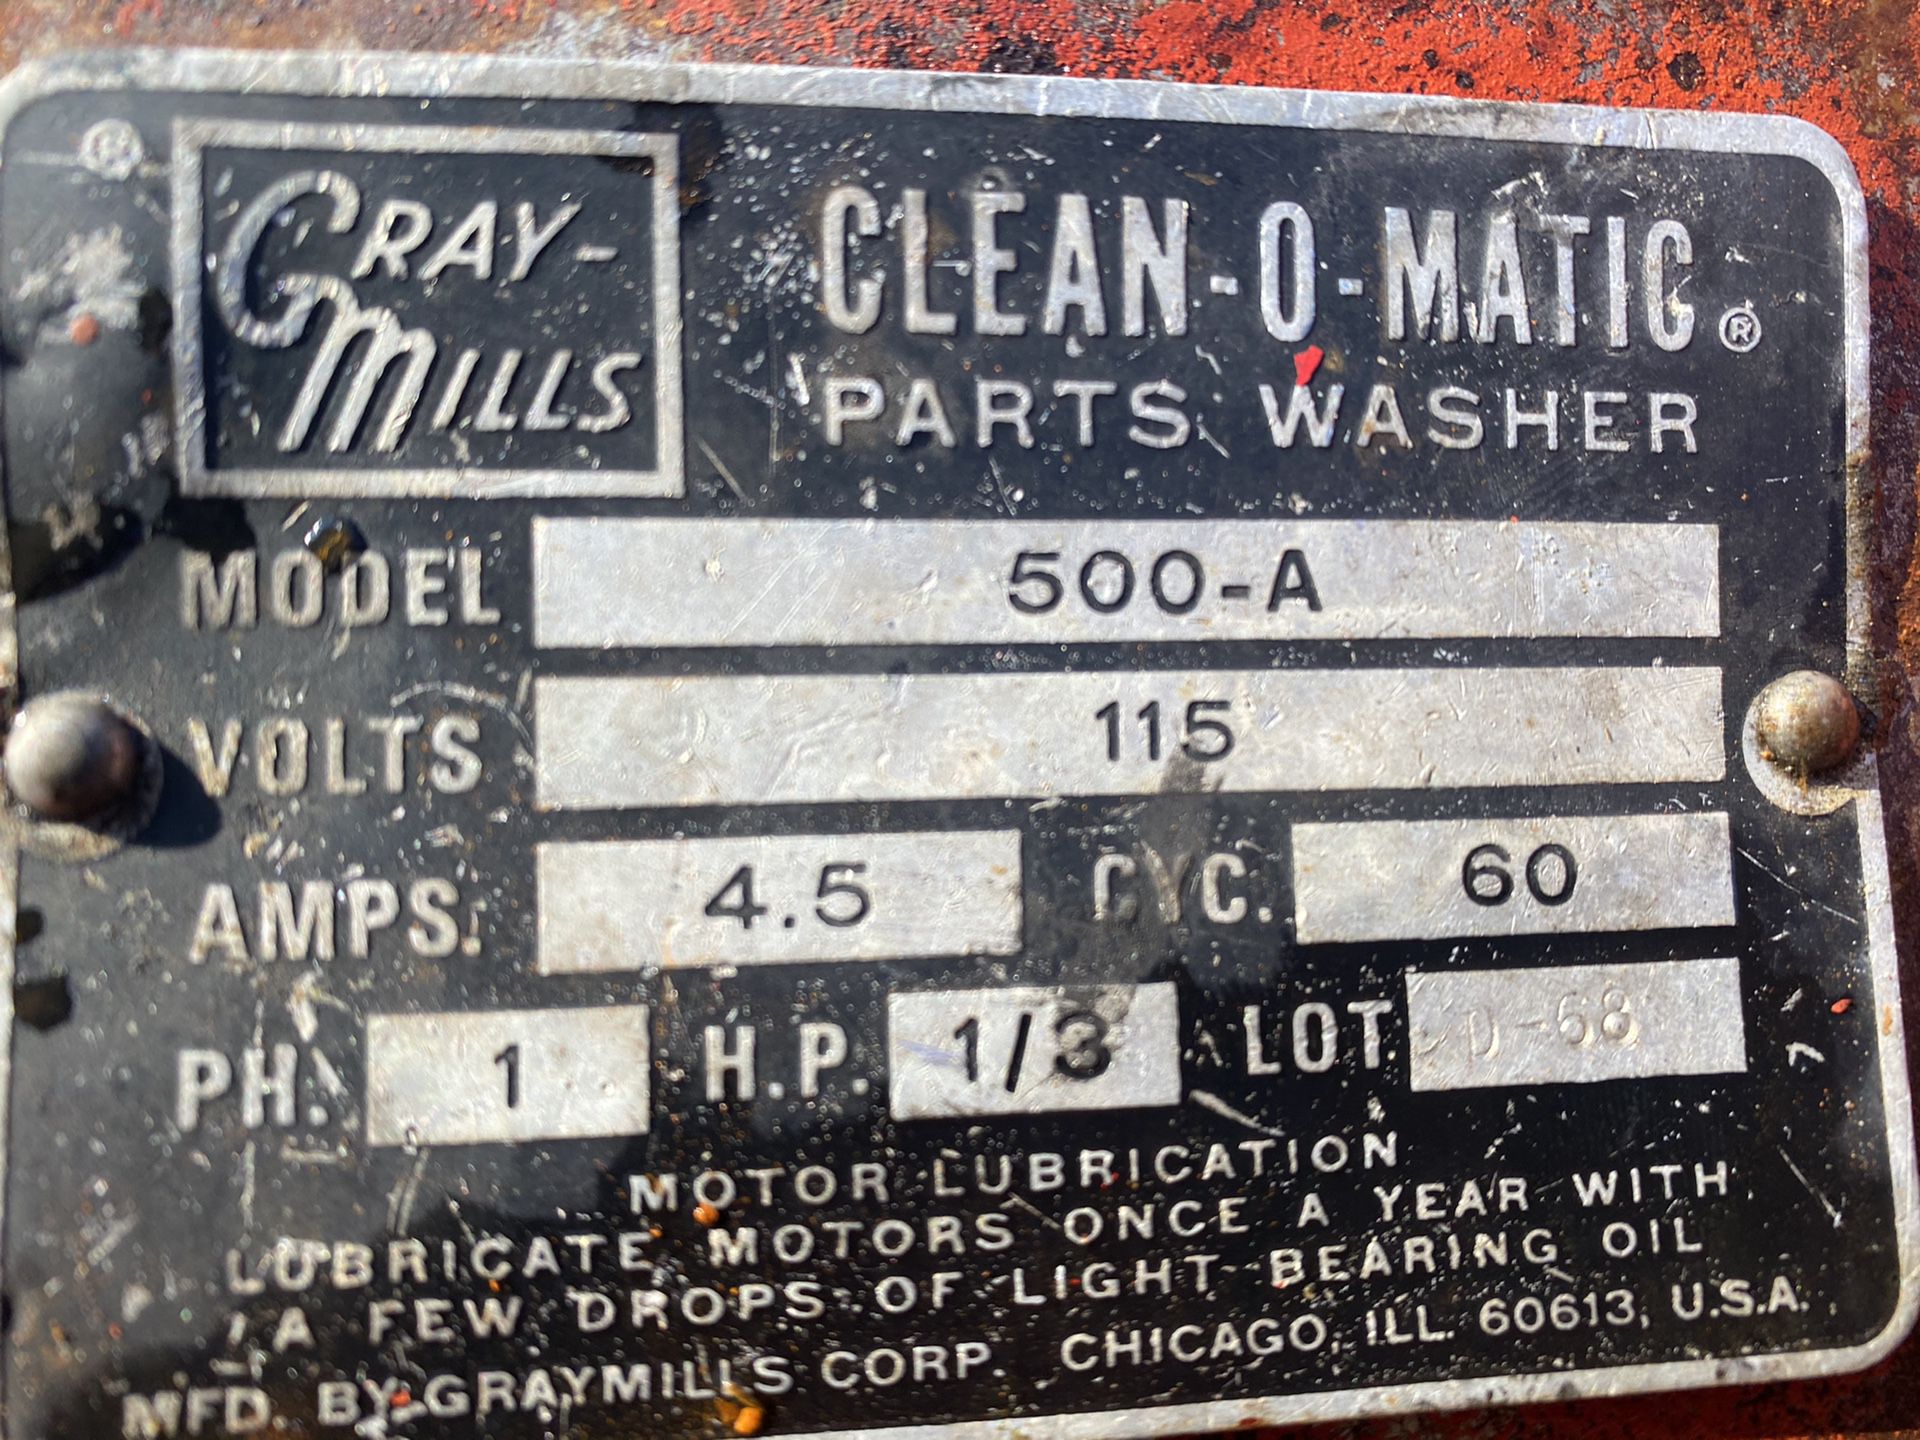 Gray Mills old school industrial parts washer